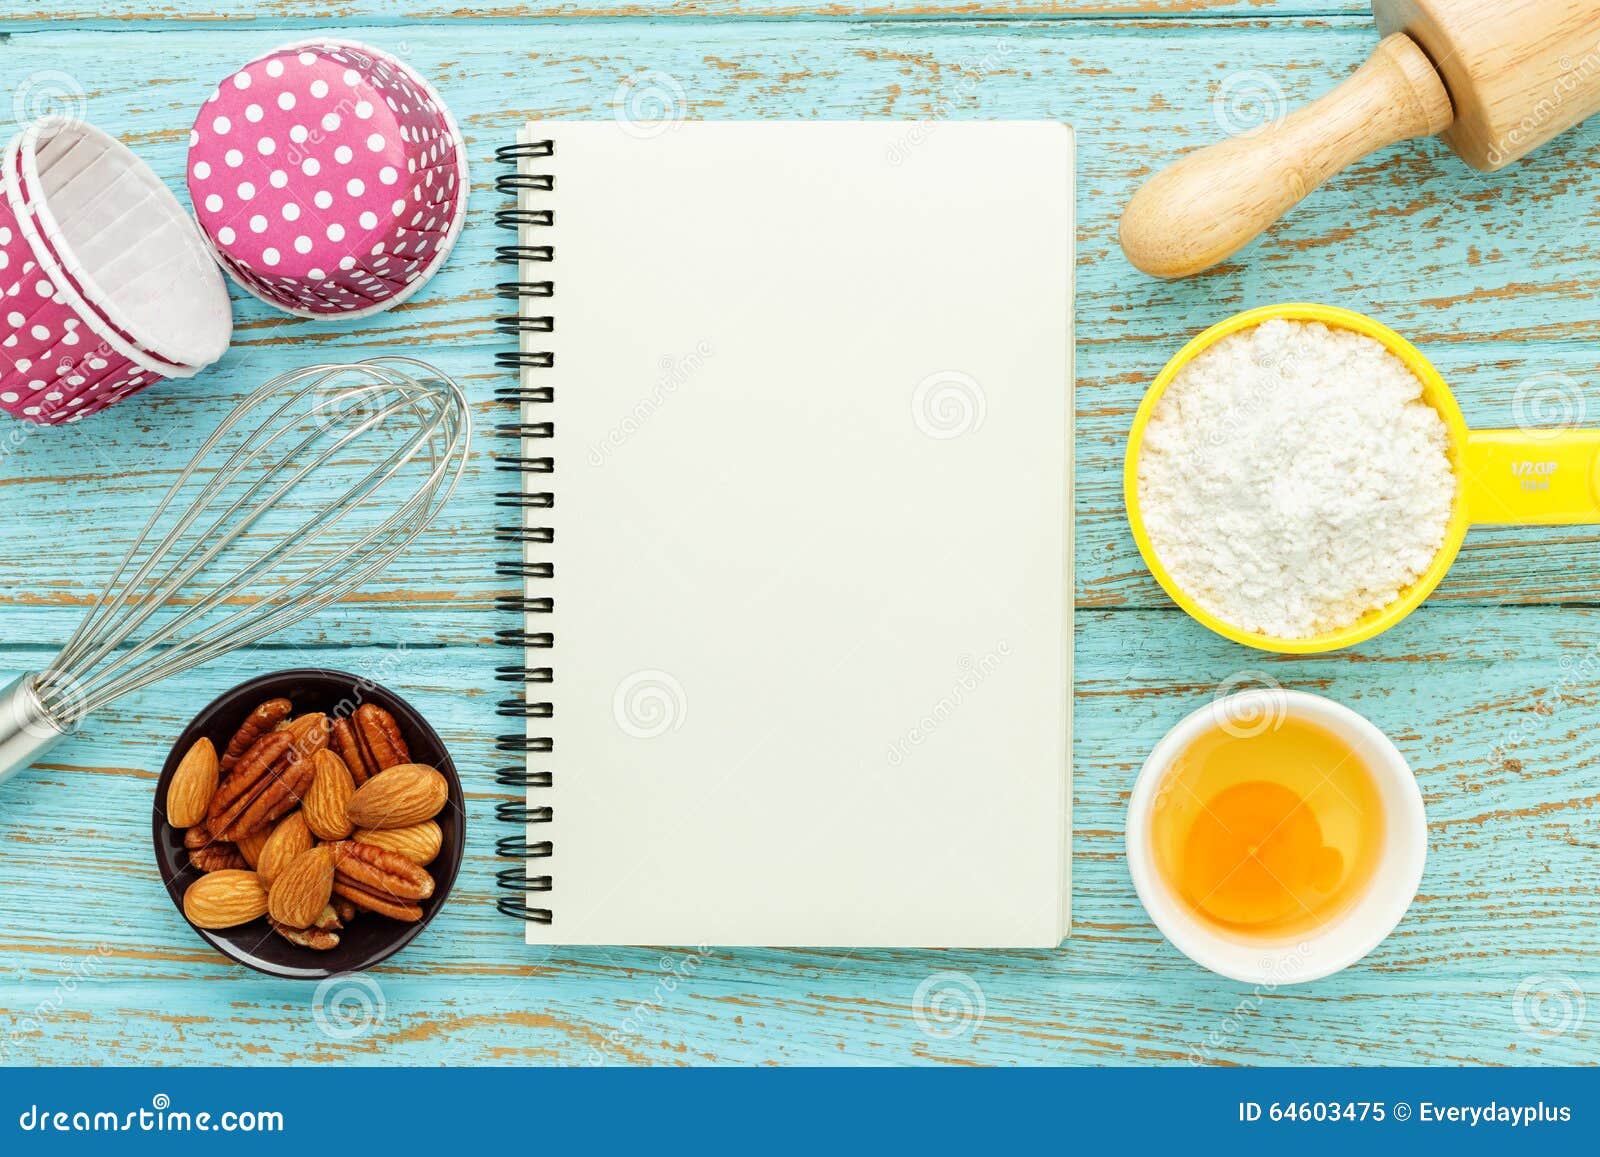 Baking Concept with Notebook Stock Image - Image of bake, concept: 64603475